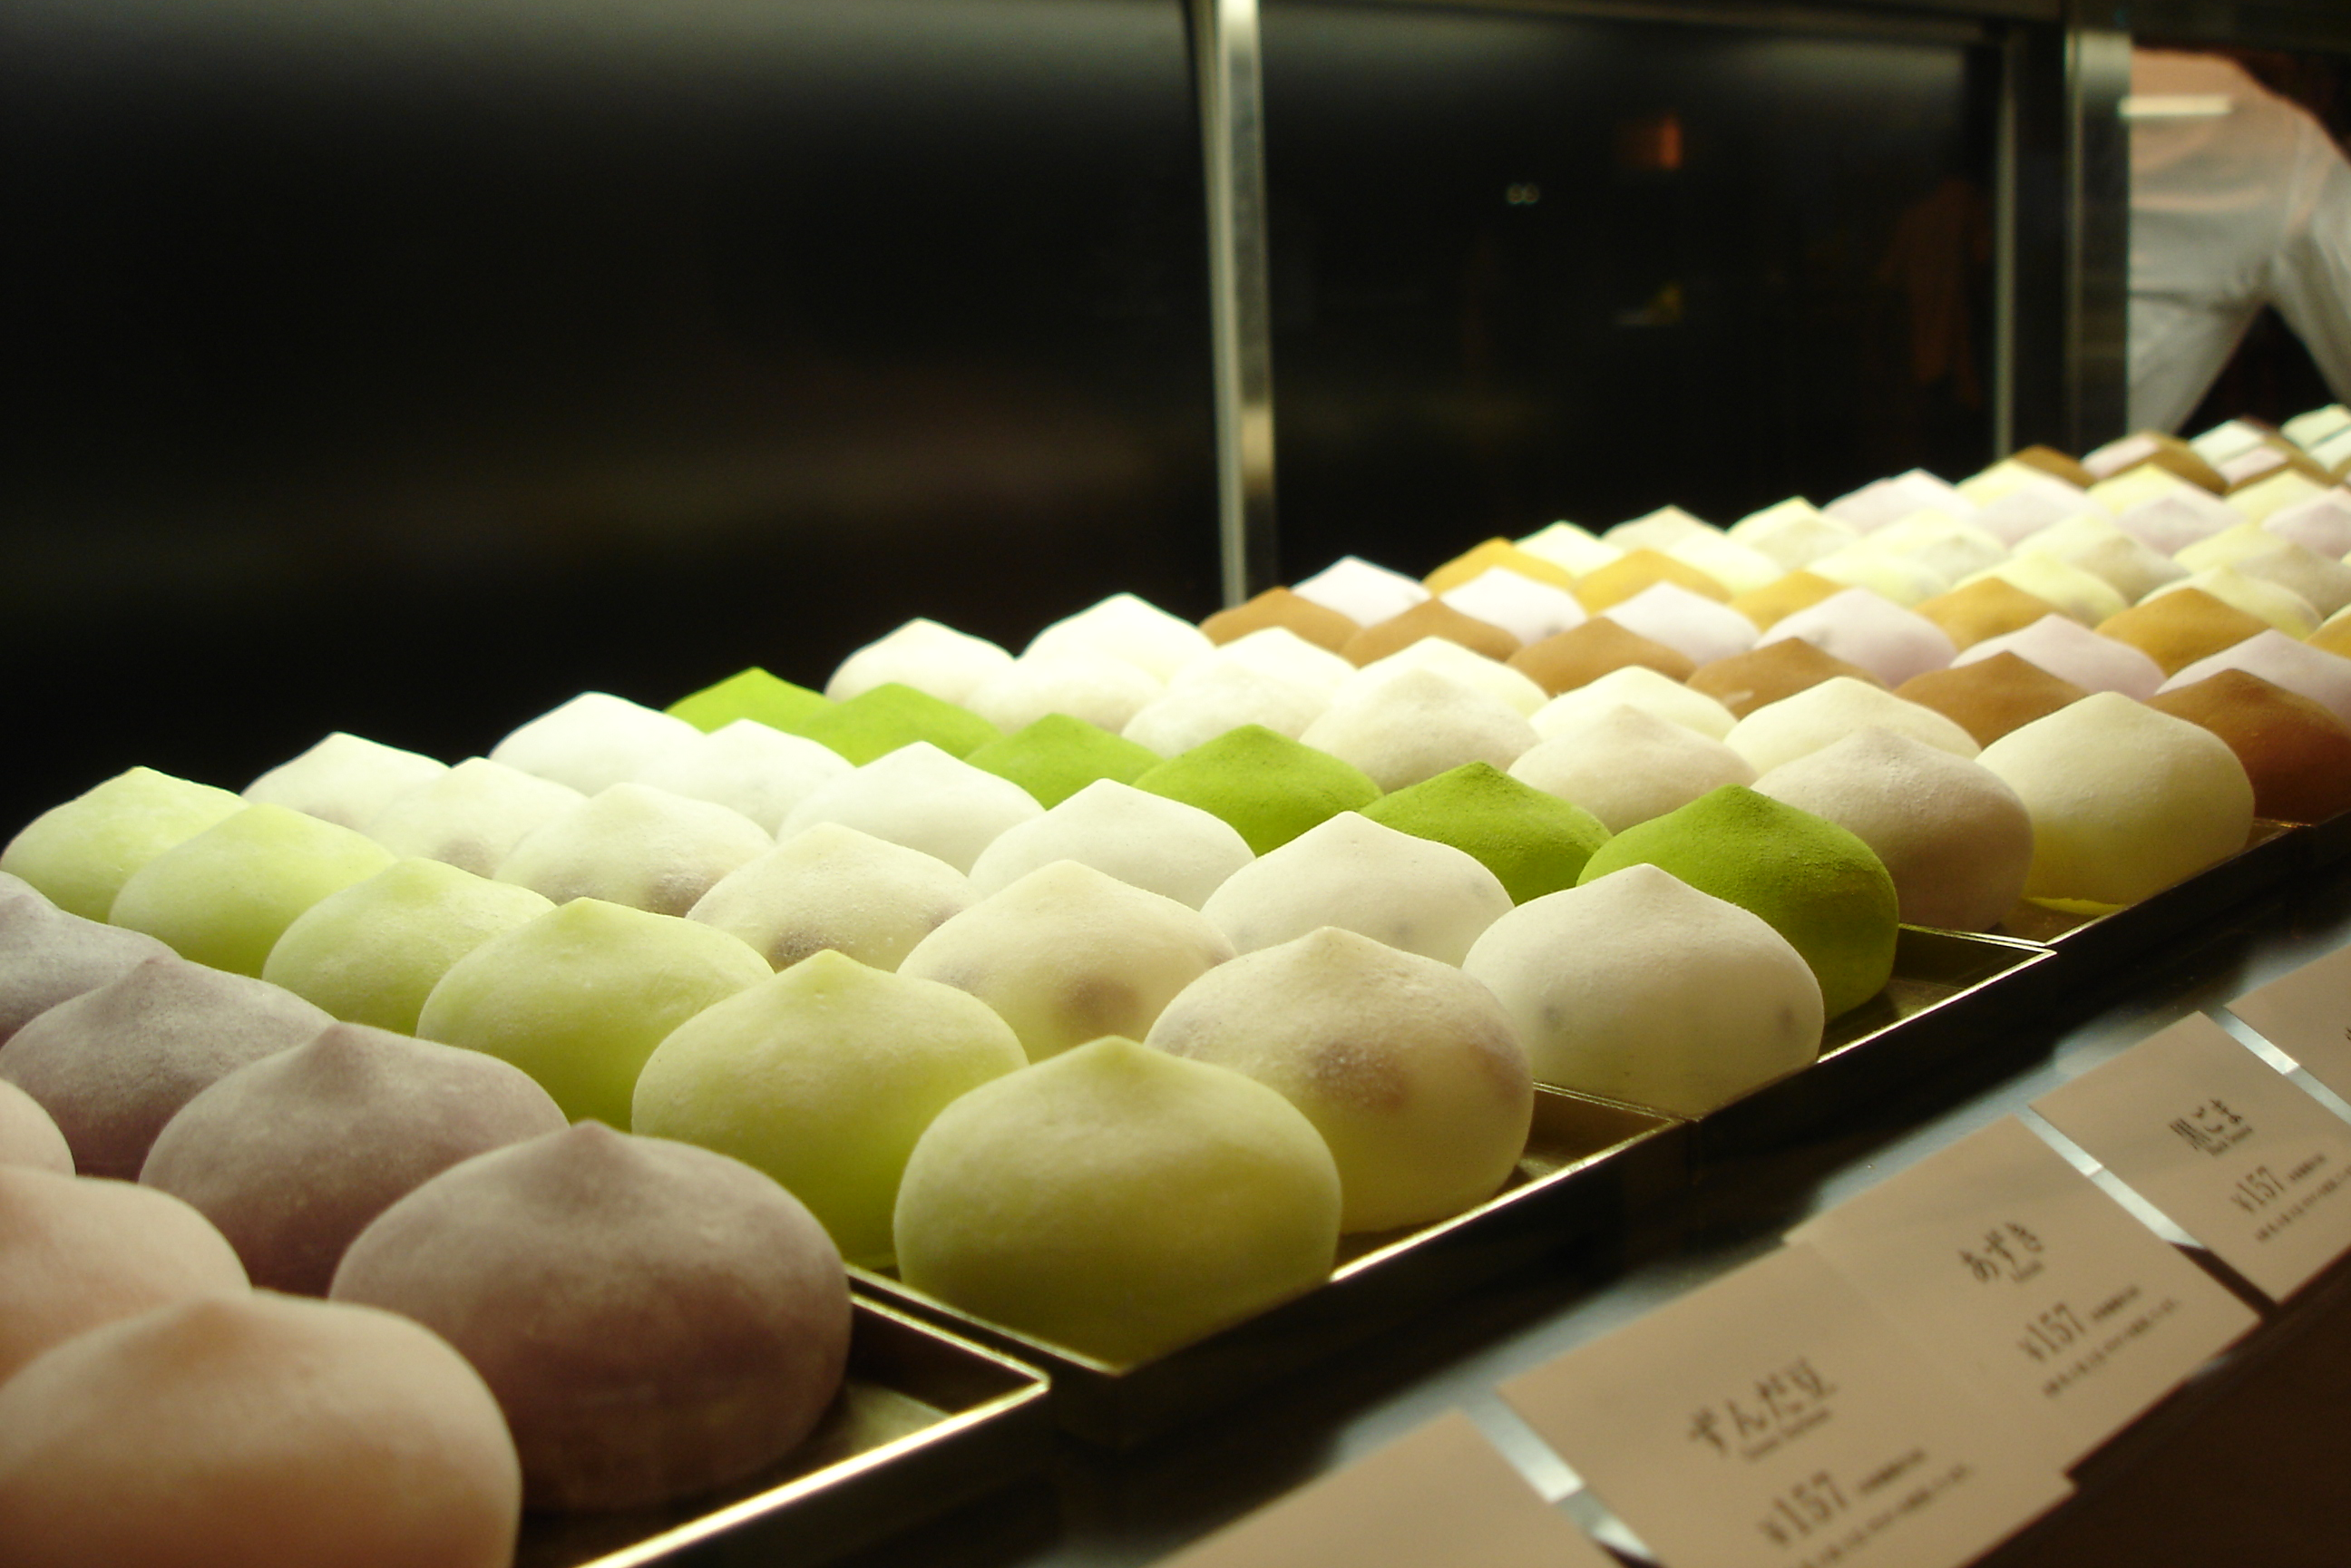 A variety of mochi on sale in Japan.